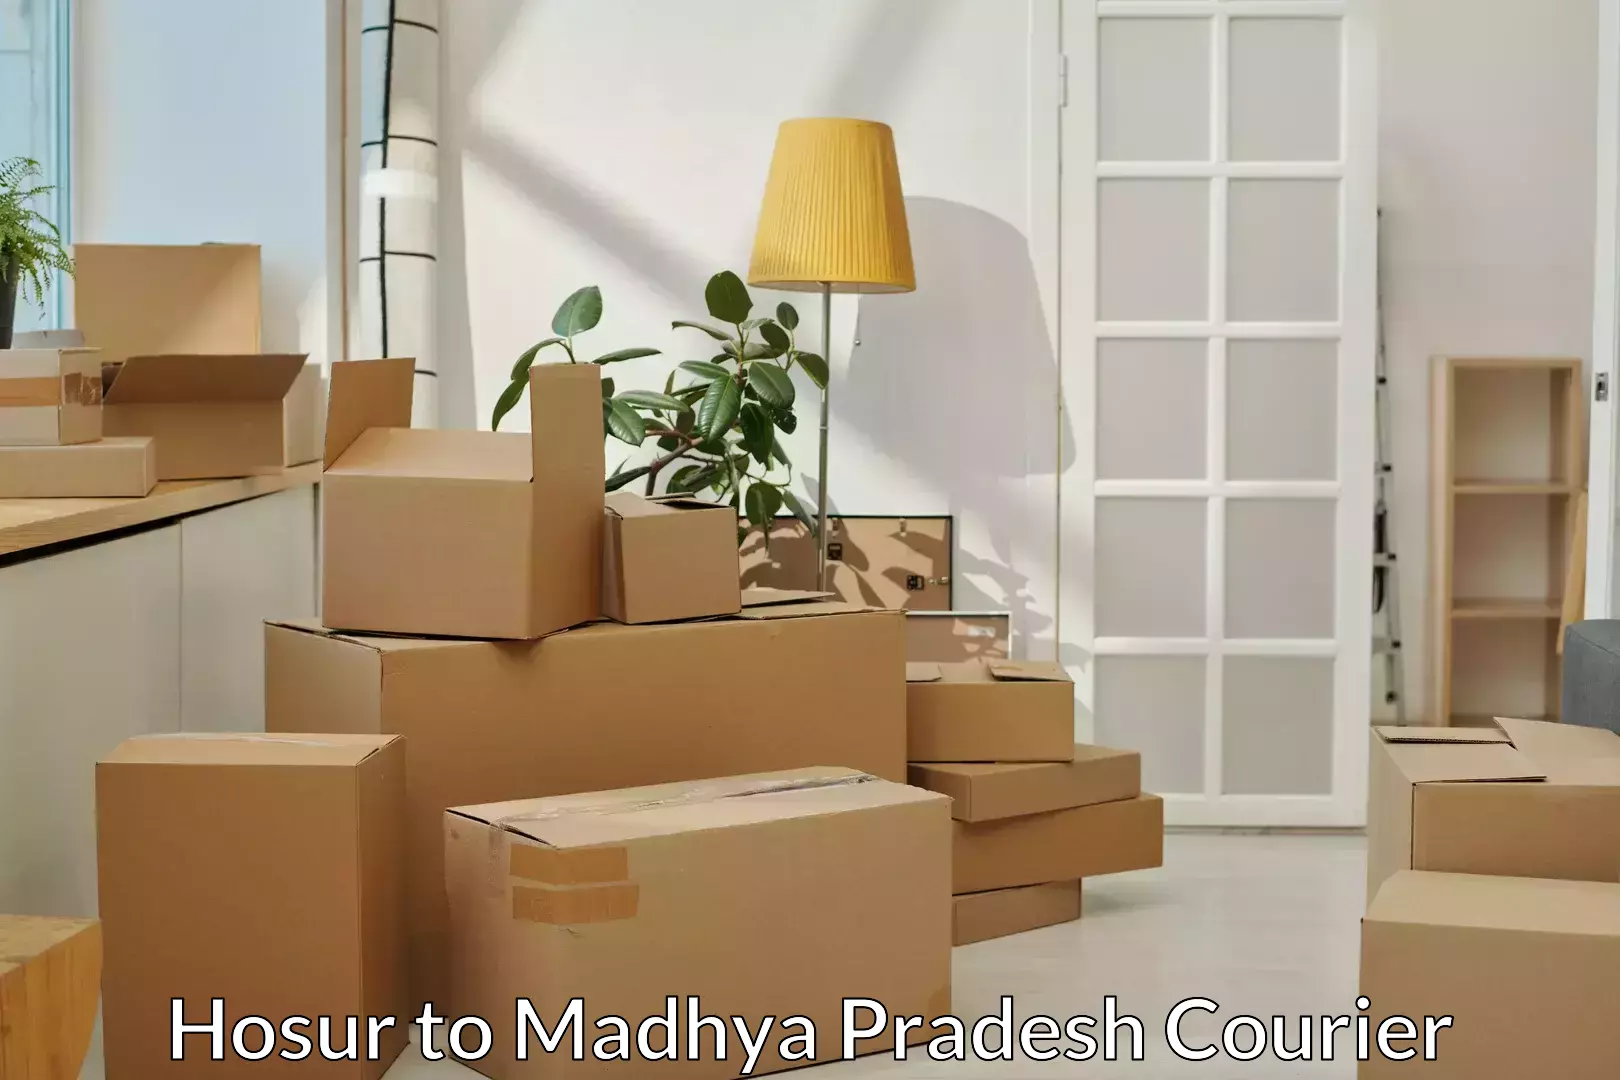 Furniture moving experts Hosur to Bhopal